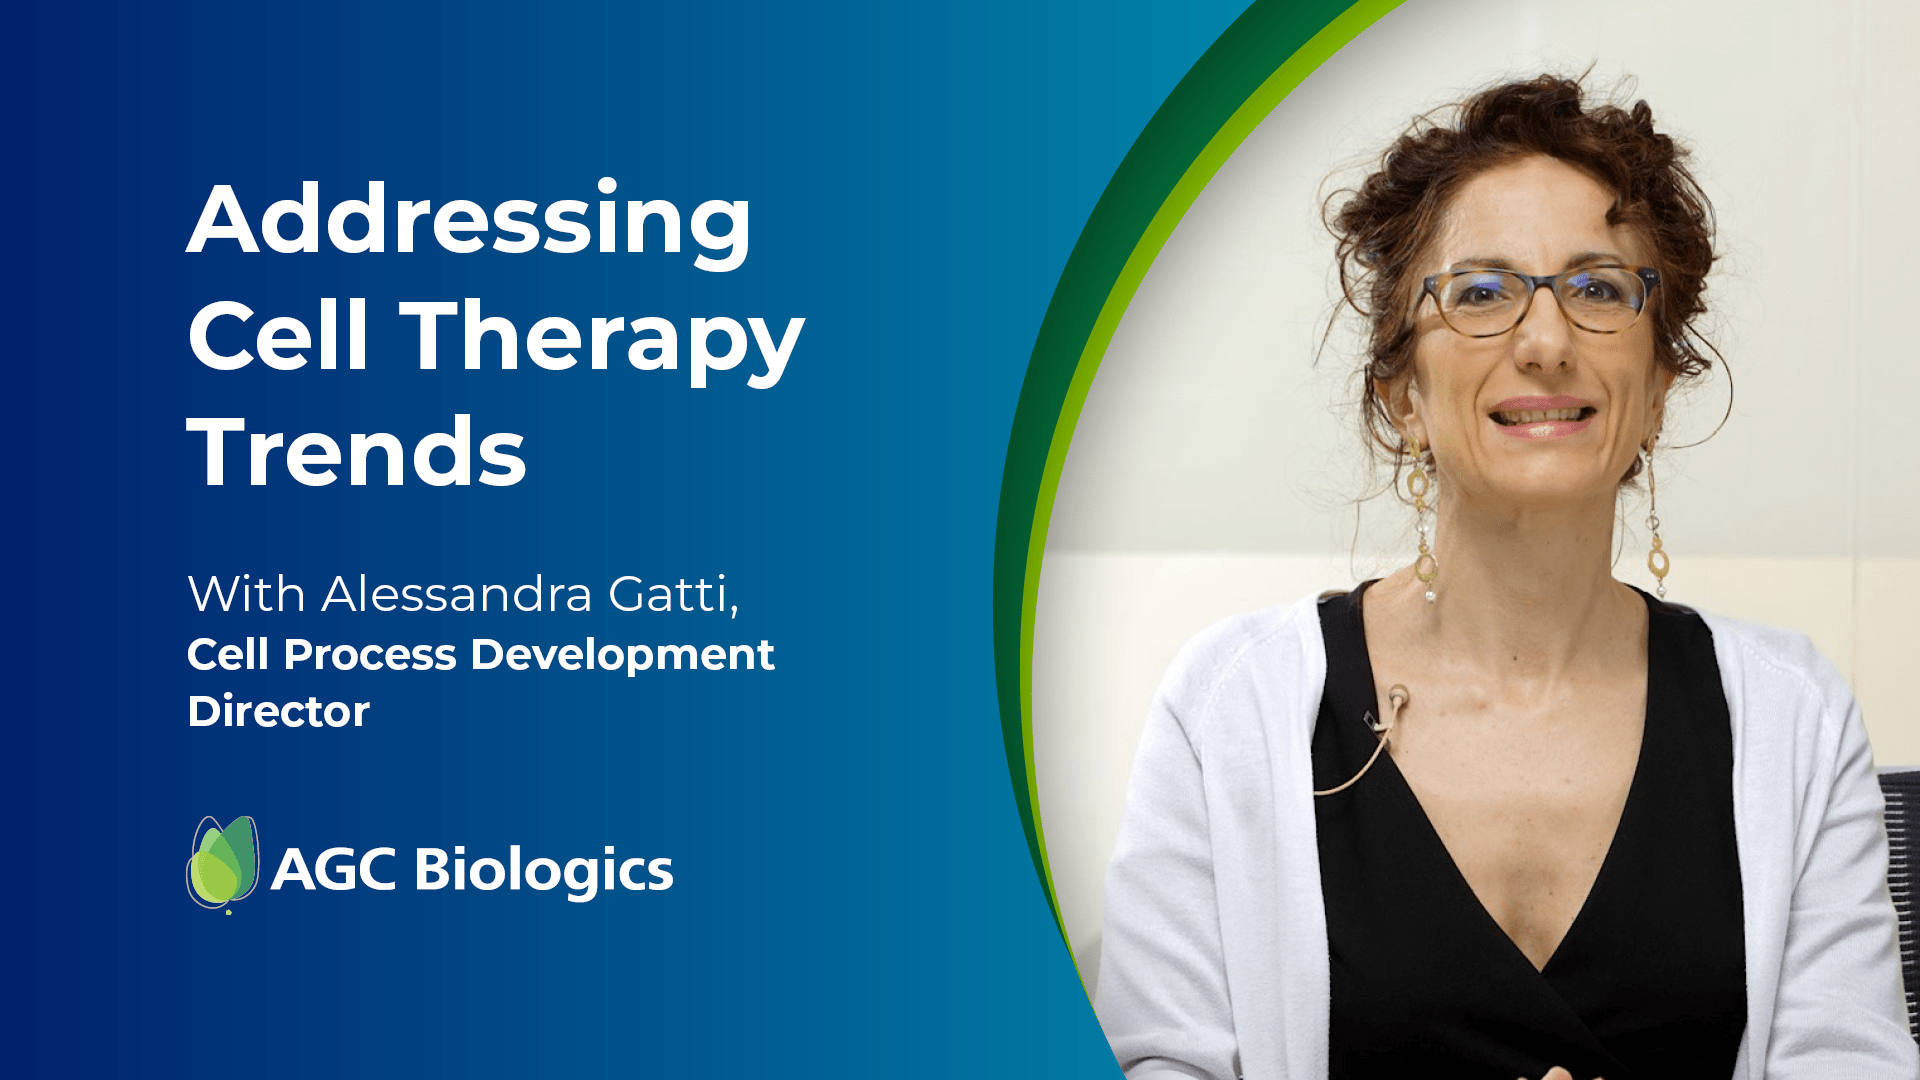 Addressing Cell Therapy Trends with Alessandra Gatti